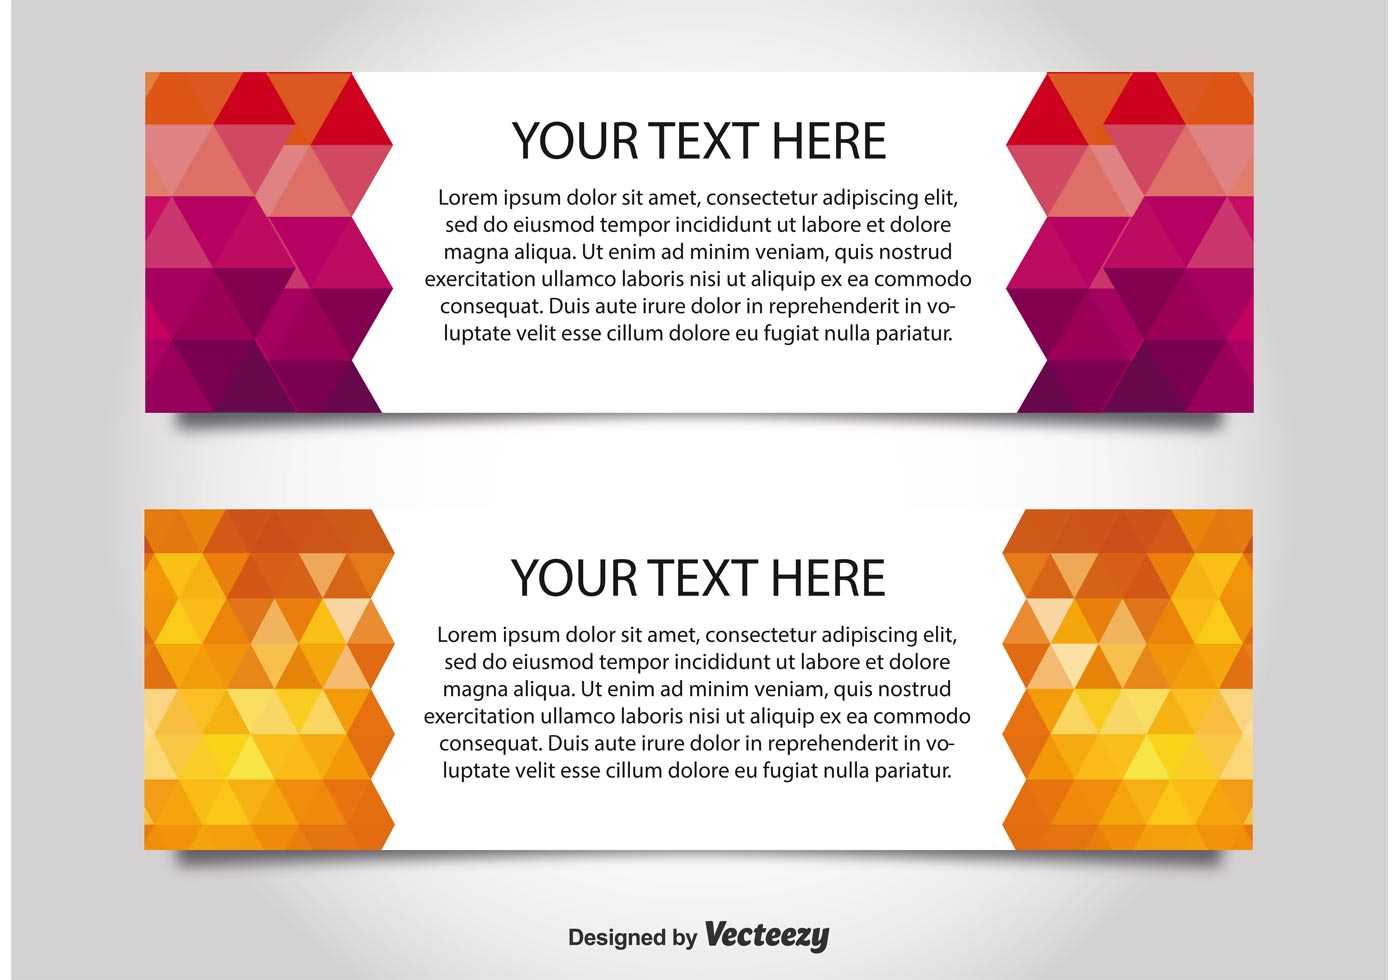 Modern Style Web Banner Templates - Download Free Vectors Throughout Free Website Banner Templates Download